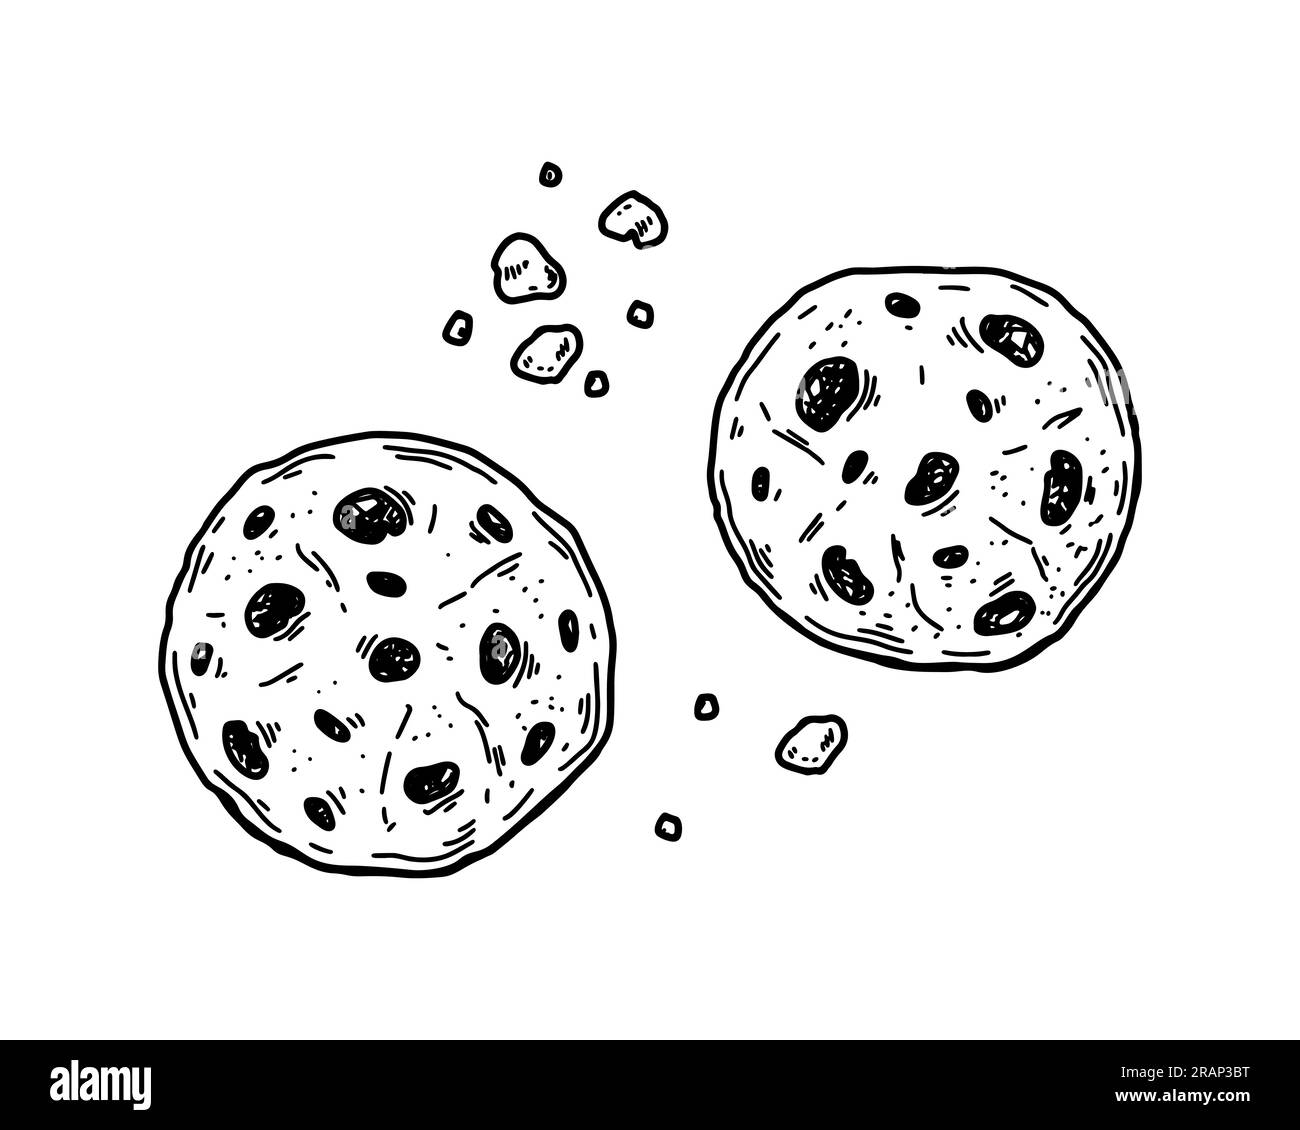 Choco chips cookie. Hand drawn vector illustration in sketch style Stock Vector